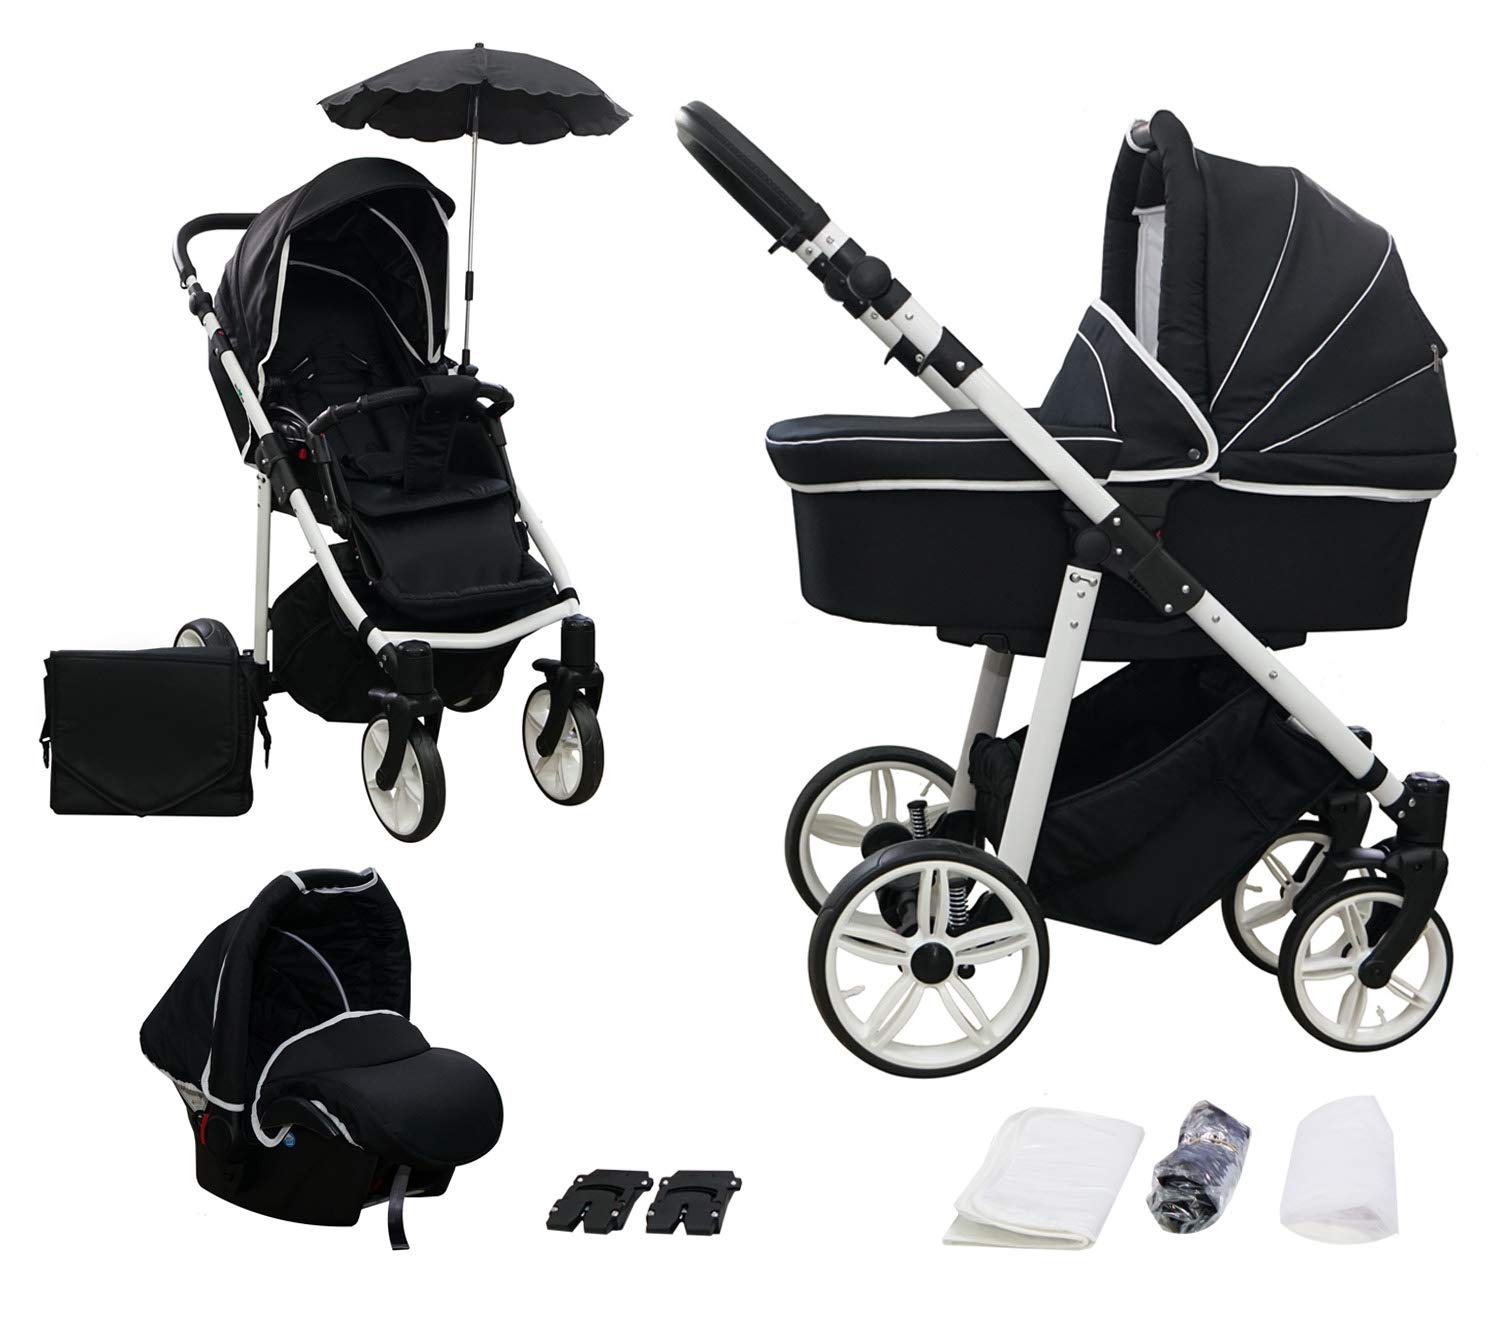 Skyline 3-in-1 Combination Pram with Aluminium Frame, Carrycot, Sports Buggy Attachment and Baby Car Seat (Isofix) Black